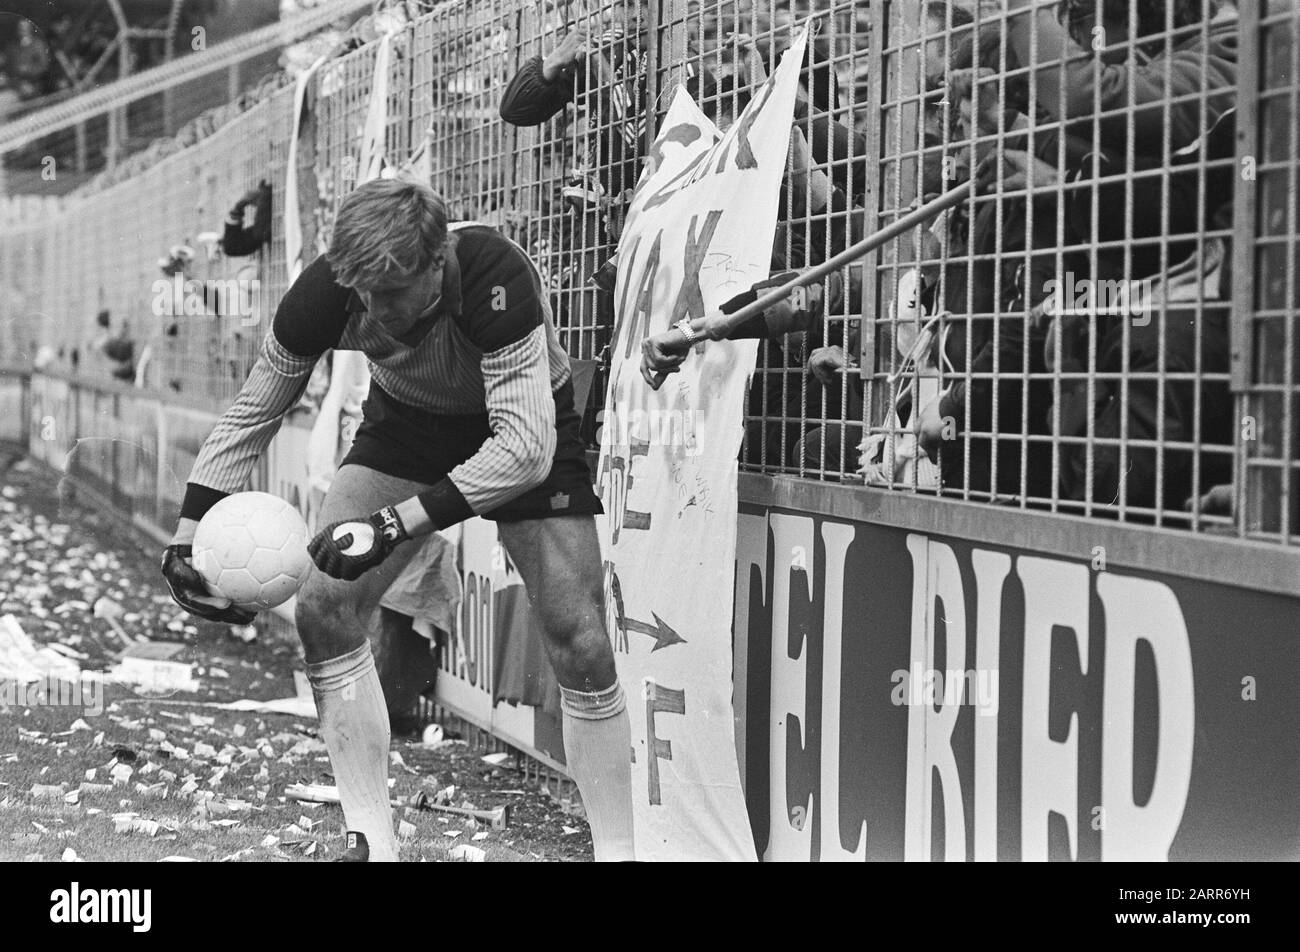 Football Ajax against FC Utrecht 1-0. Van Breukelen (goalkeeper) gets blows with stick of the F-side when he took ball at fence Date: May 2, 1982 Keywords: goalkeepers, sport, football Institution name : FC Utrecht Stock Photo